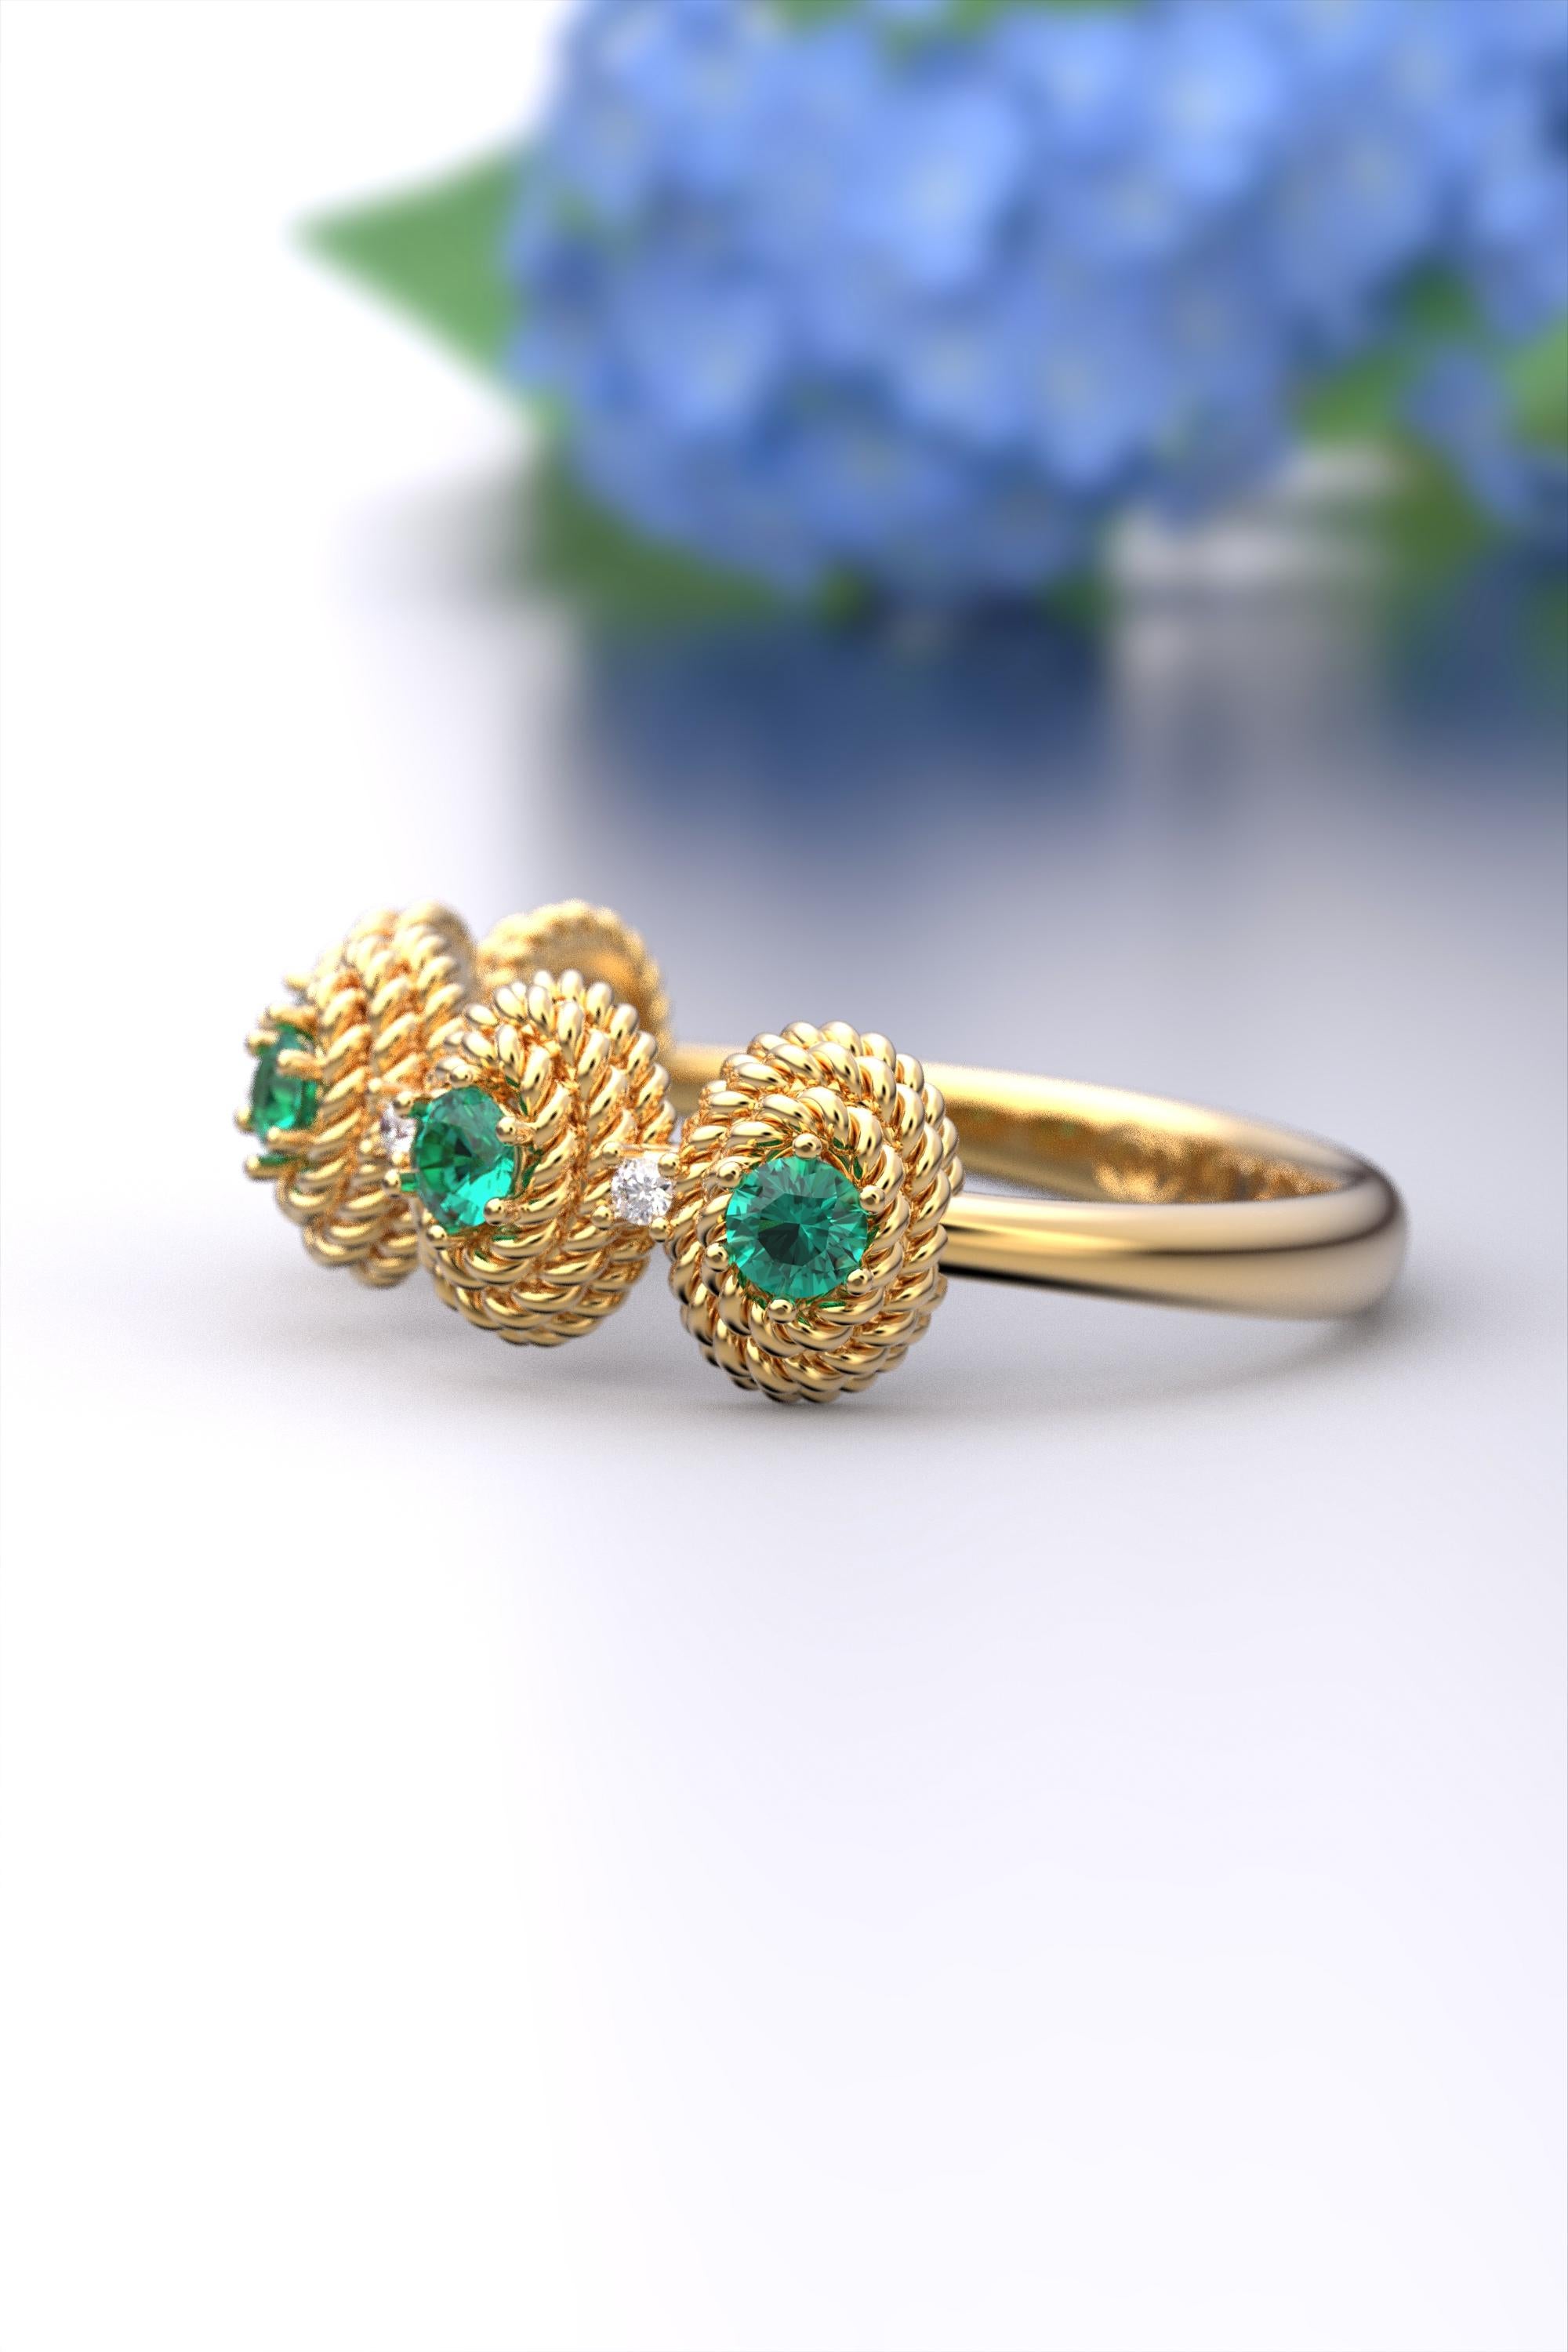 For Sale:  Emerald and Diamond Ring Made in Italy in 14k Gold by Oltremare Gioielli 3